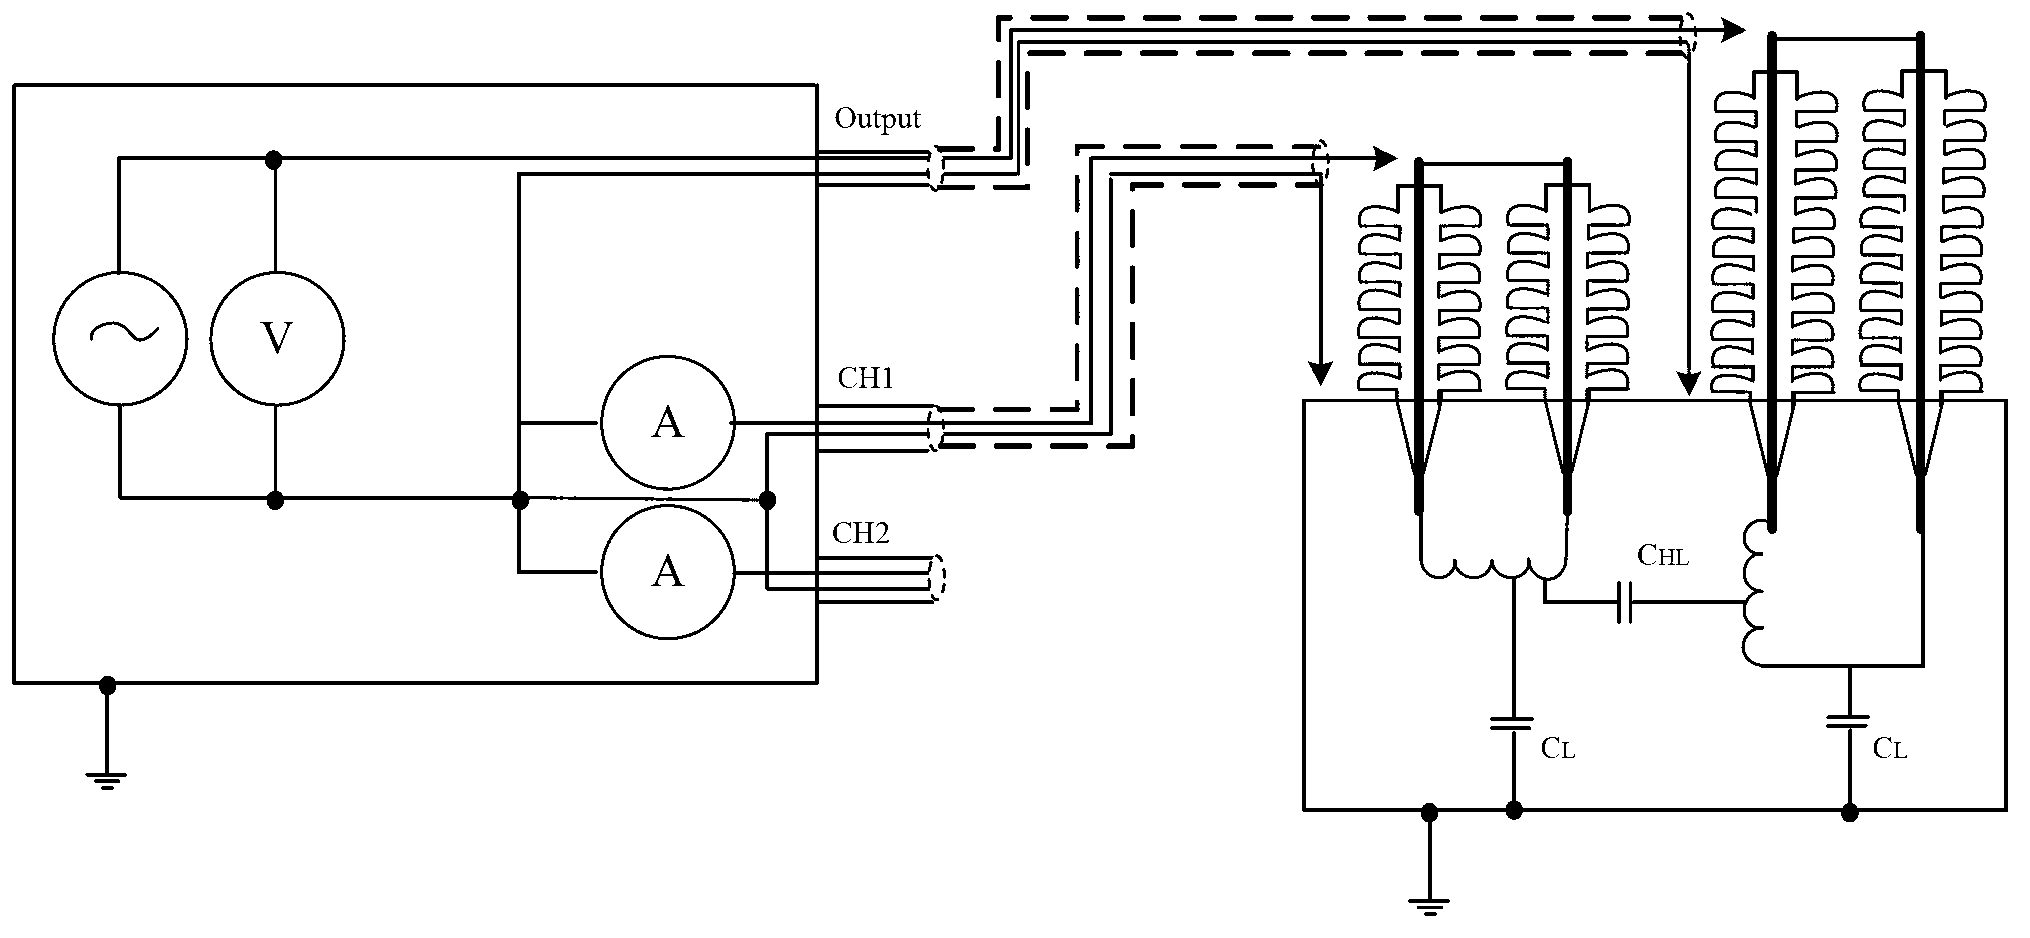 Method for evaluating insulation aging state of oil paper insulation electrical equipment on basis of frequency domain spectroscopy